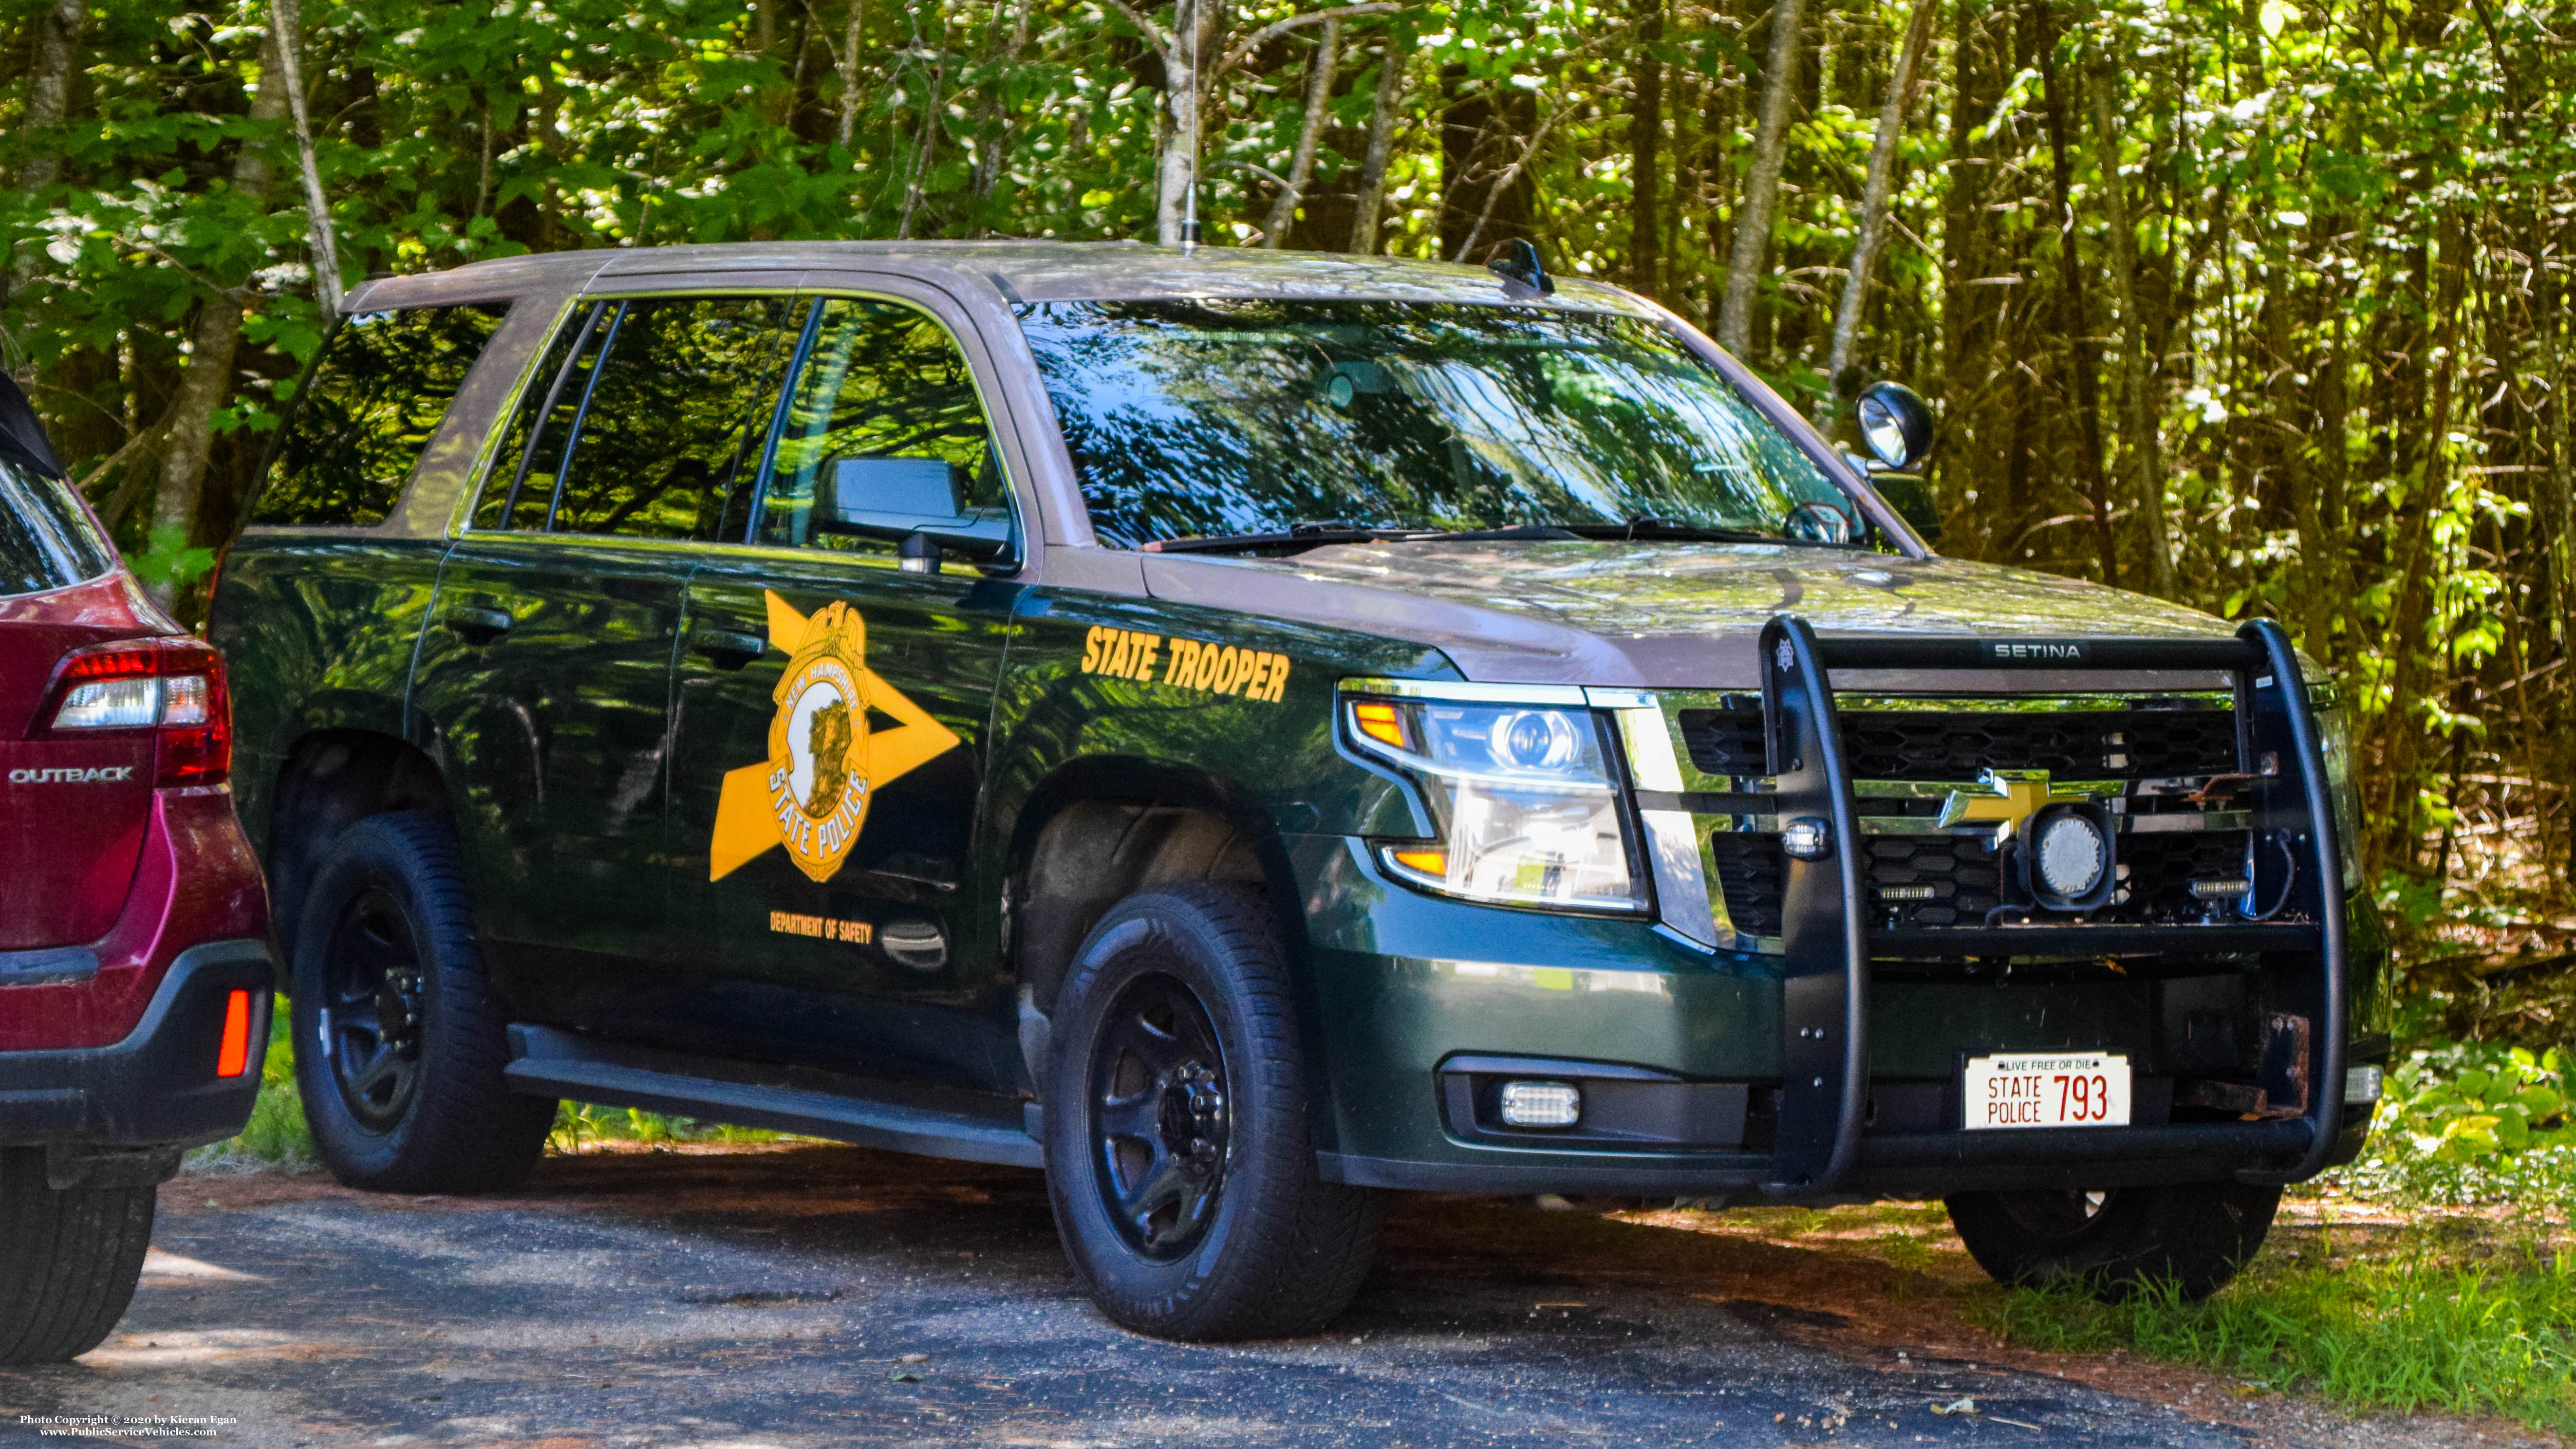 A photo  of New Hampshire State Police
            Cruiser 793, a 2014-2019 Chevrolet Tahoe             taken by Kieran Egan